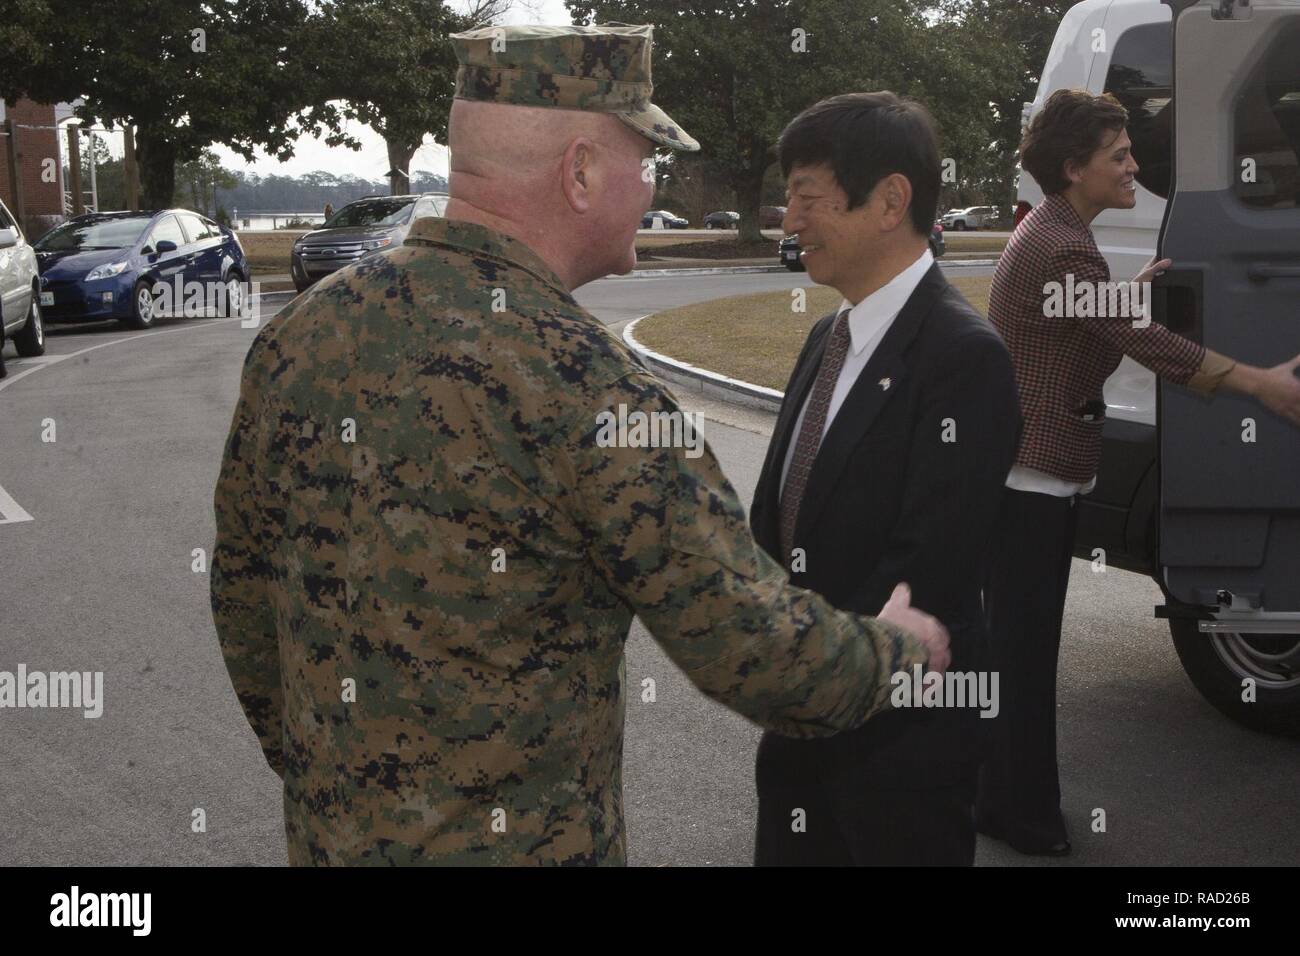 U.S. Marine Corps Maj. Gen. Walter L. Miller Jr., commanding general, II Marine Expeditionary Force (II MEF), greets Consul General for Japan Takashi Shinozuka during a visit to Camp Lejeune, N.C., Jan. 20, 2017. The purpose of the visit was to provide Consul General Shinozuka an opportunity to meet with senior leadership of II MEF as well as a familiarization overview of the MV-22 Osprey training syllabus that Japanese pilots are undergoing at Marine Corps Air Station New River. Stock Photo